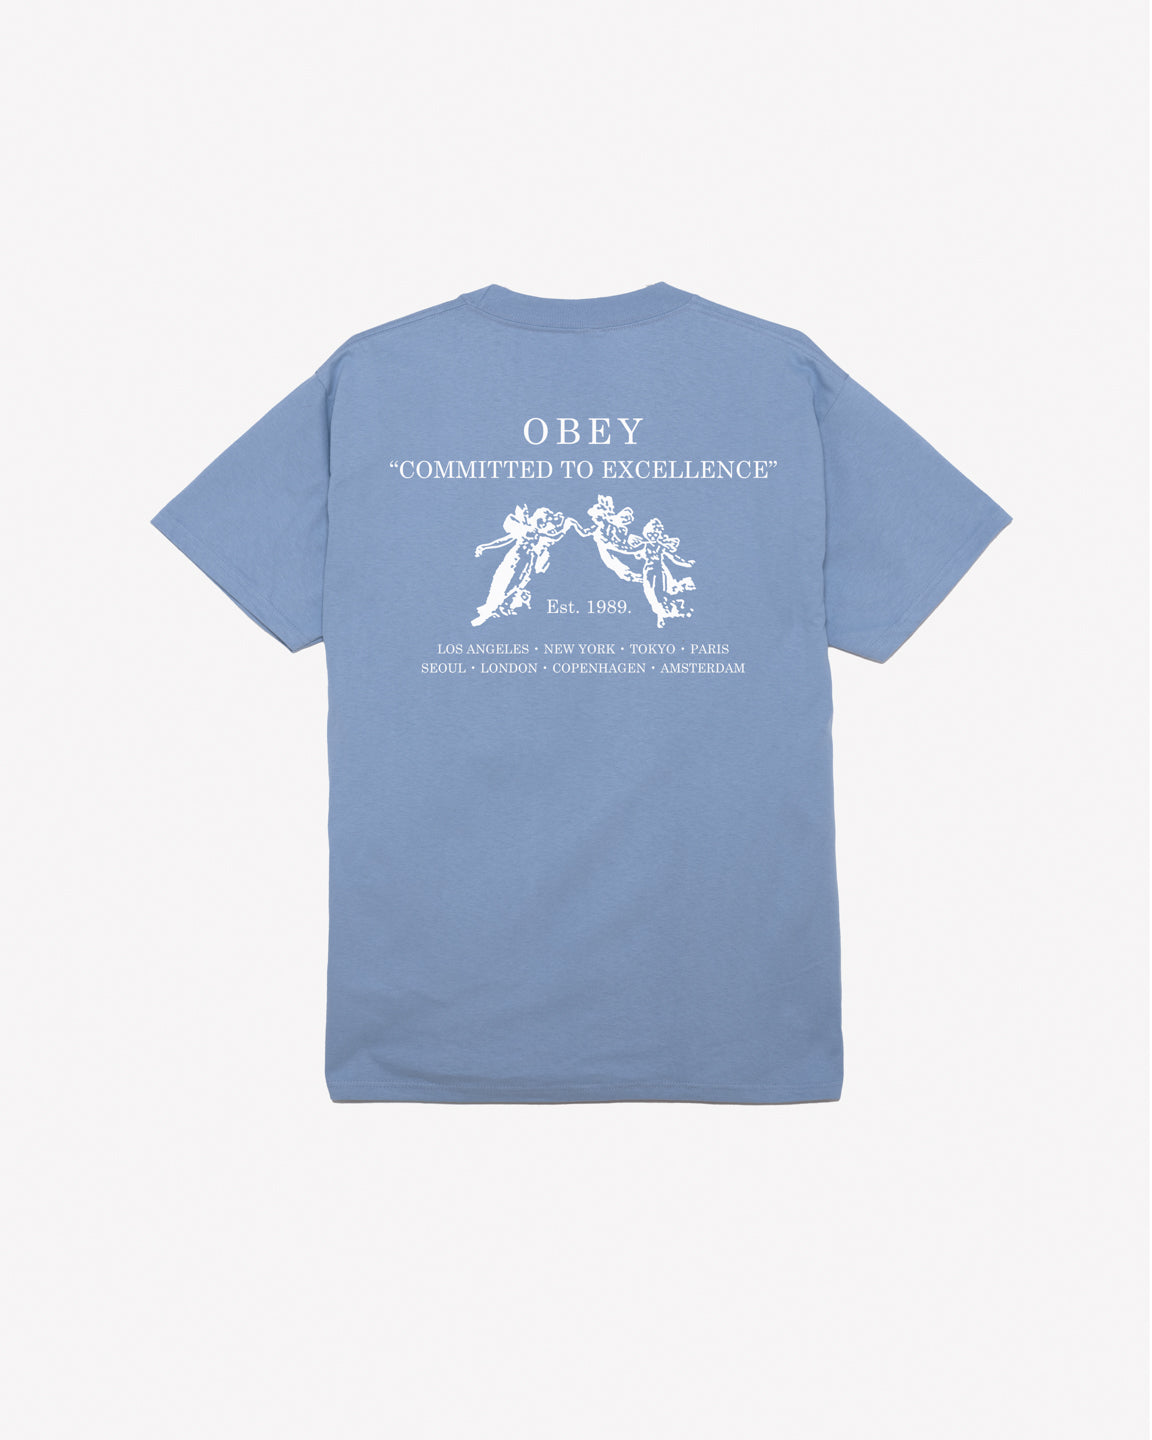 OBEY COMMITTED TO EXCELLENCE CLASSIC T-SHIRT